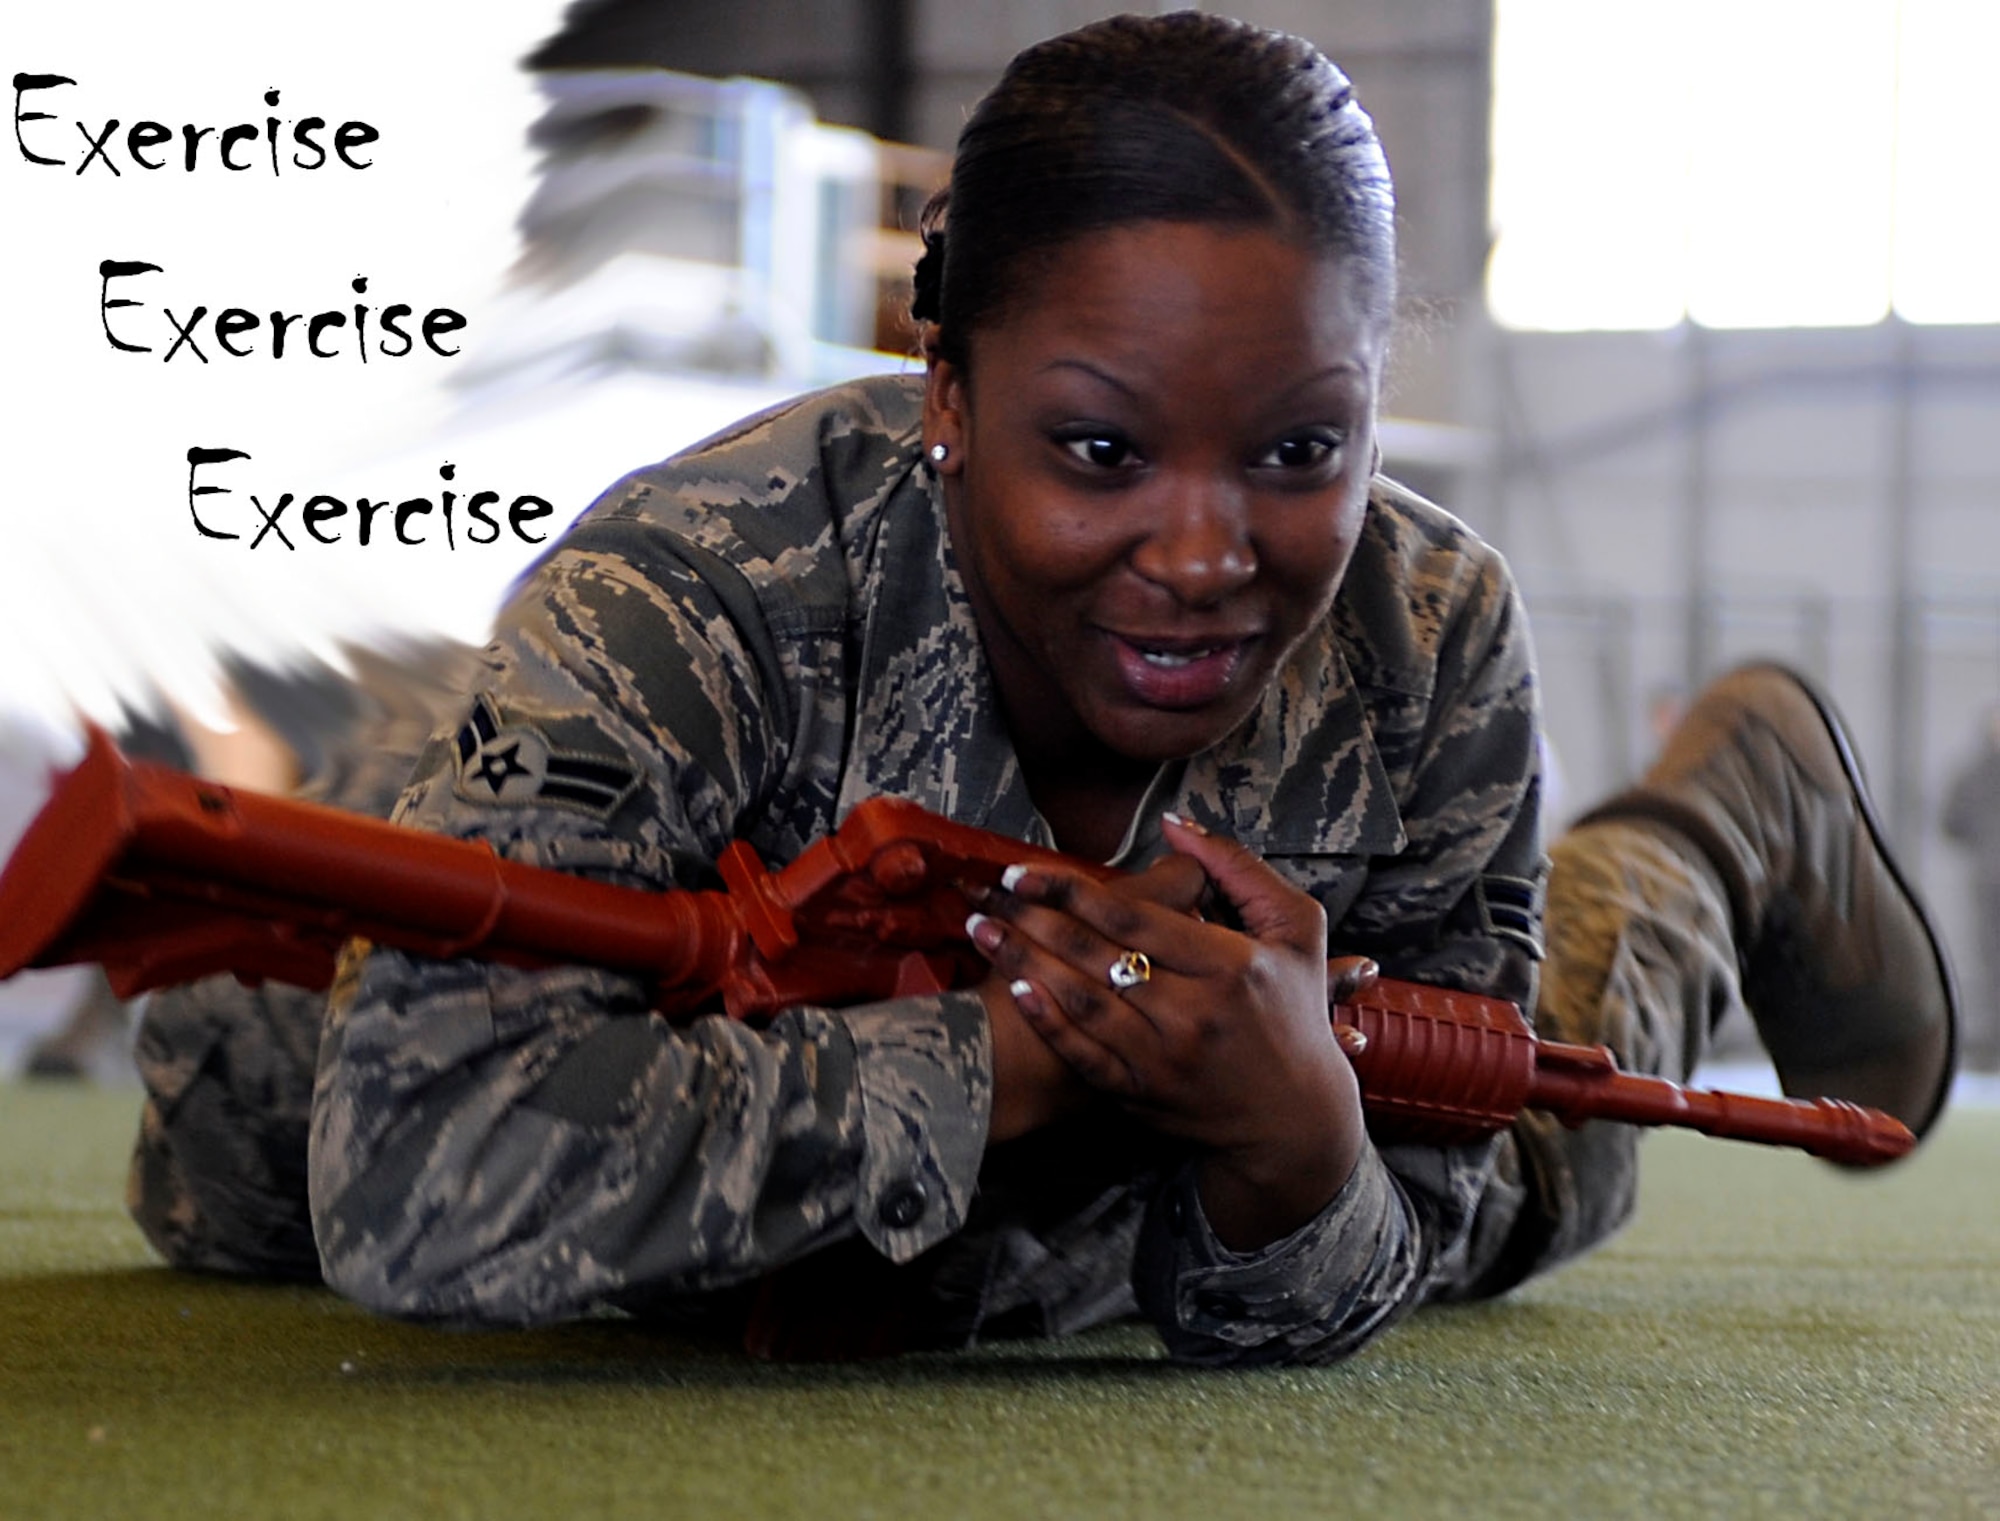 Airman 1st Class Wintera Jones, 28th Force Support Squadron personnel technician, practices high crawling during a 28th Mission Support Group deployment readiness exercise in the Pride Hangar at Ellsworth Air Force Base, S.D., Feb. 14, 2013. The 28th Security Forces Squadron hosted the exercise which focused on cover and concealment, M-4 carbine and M-9 handgun familiarization and what to do in the event of an active shooter scenario. (U.S. Air Force photo illustration by Airman Ashley J. Thum/Released)